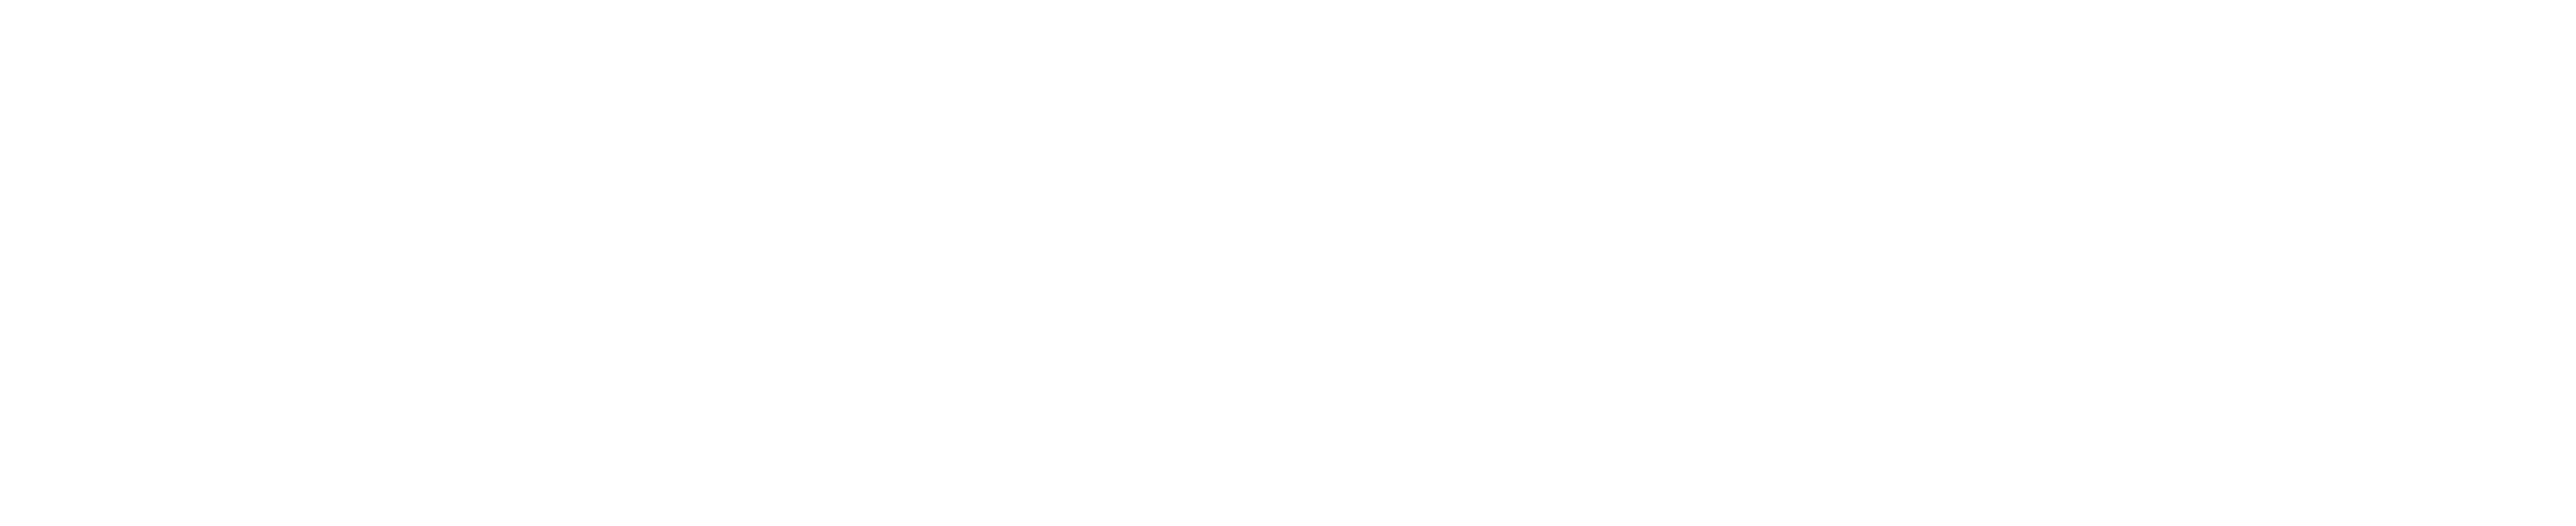 Kydeon Global Services